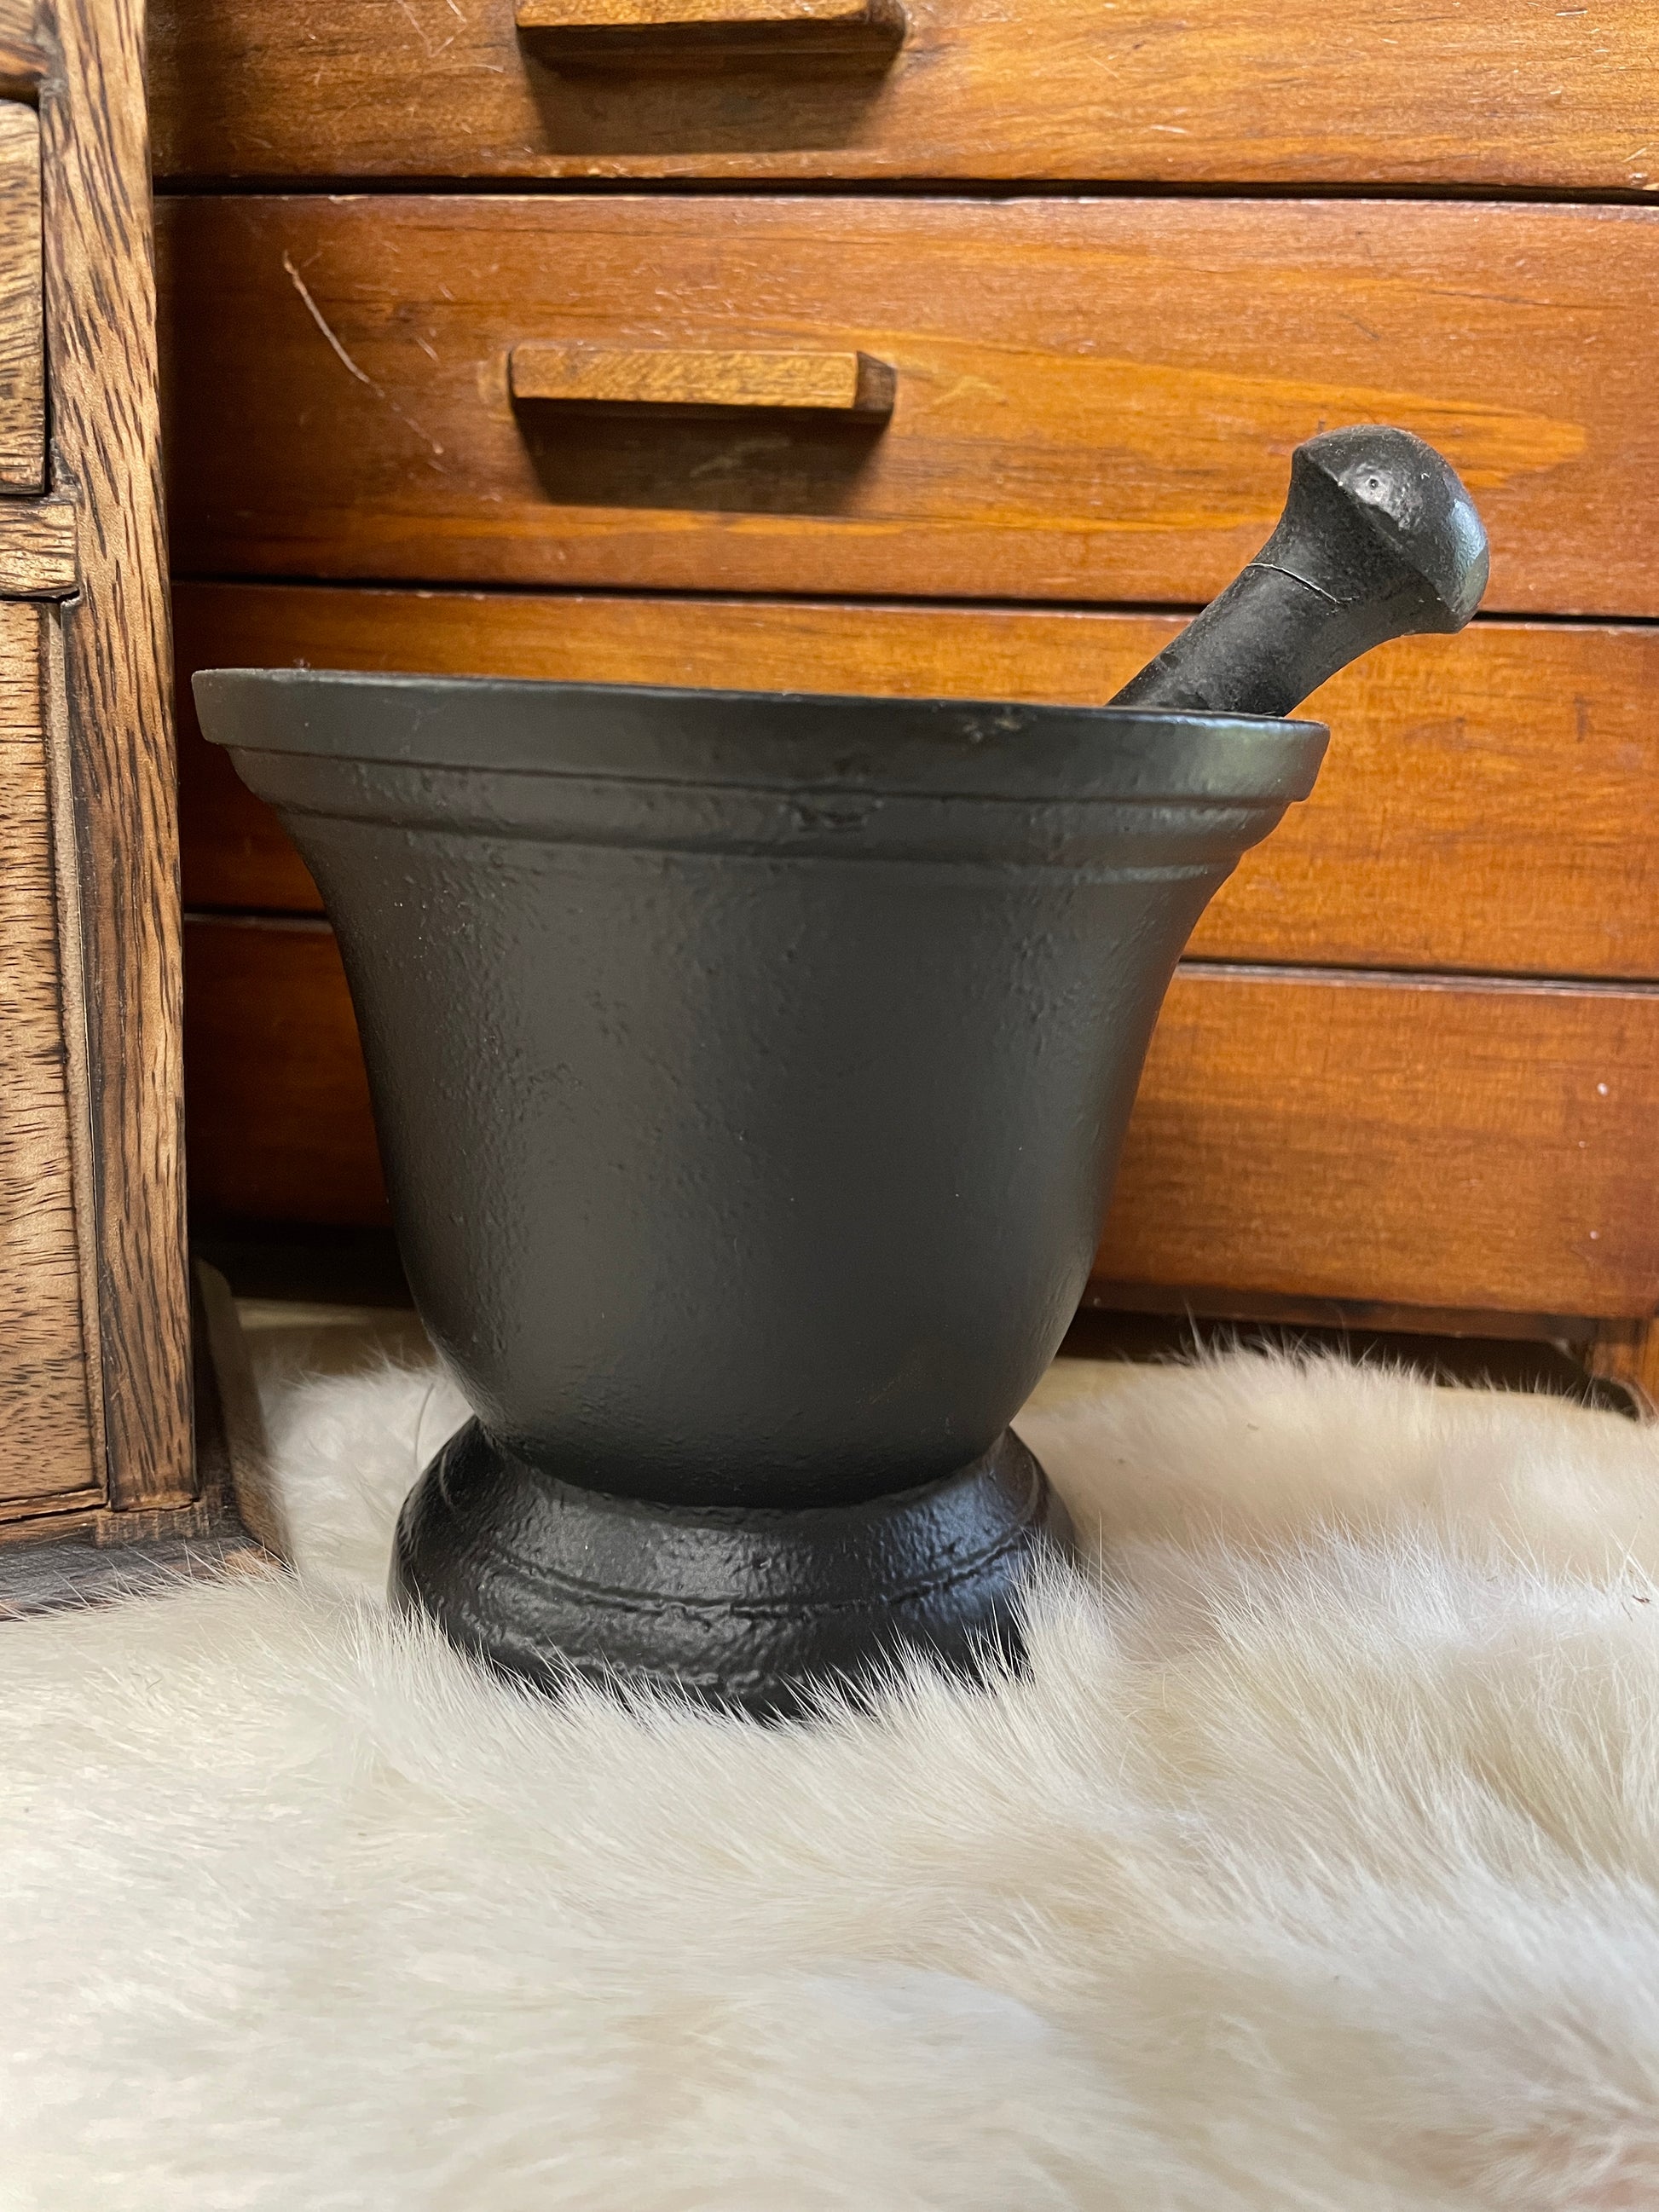 Products Cast Iron 4.5" Mortar and Pestle | Grinding Herbs Spices Resins and Wood | Smudging Small Cauldron | Altar Decoration